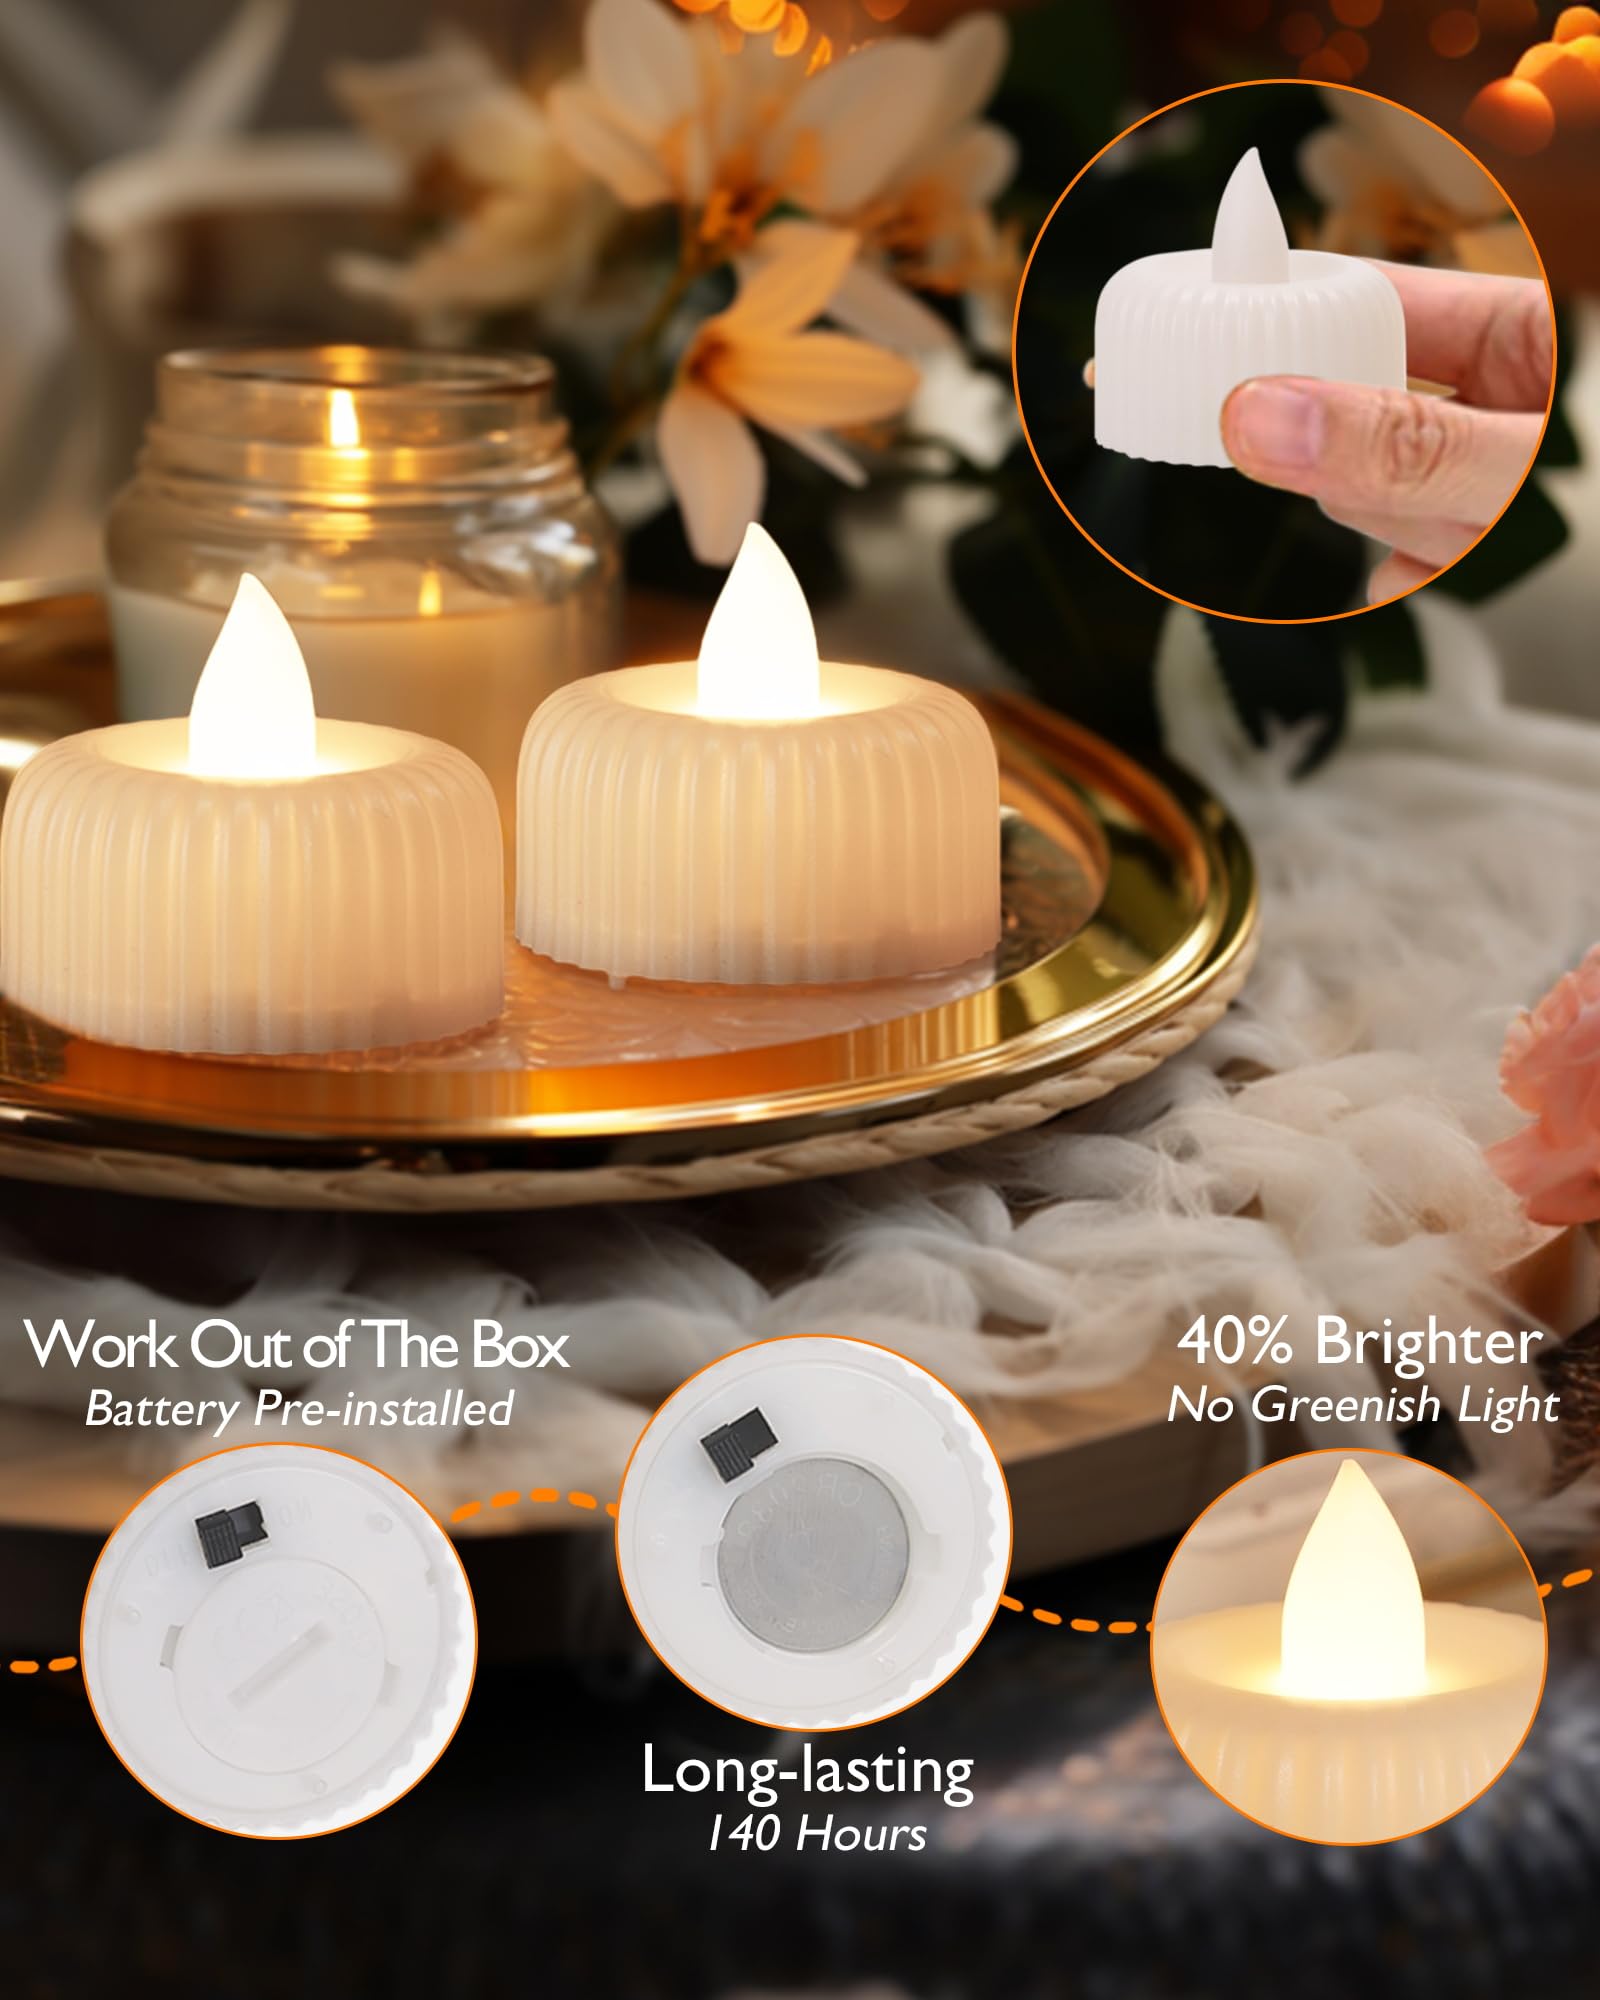 Raycare 24Pack Flameless LED Tea Lights Battery Operated, Last 3X Longer Fake Electric Tealights Candles Flickering Votive Candles for Halloween, Christmas, Wedding Decor, Centerpiece Table Decor